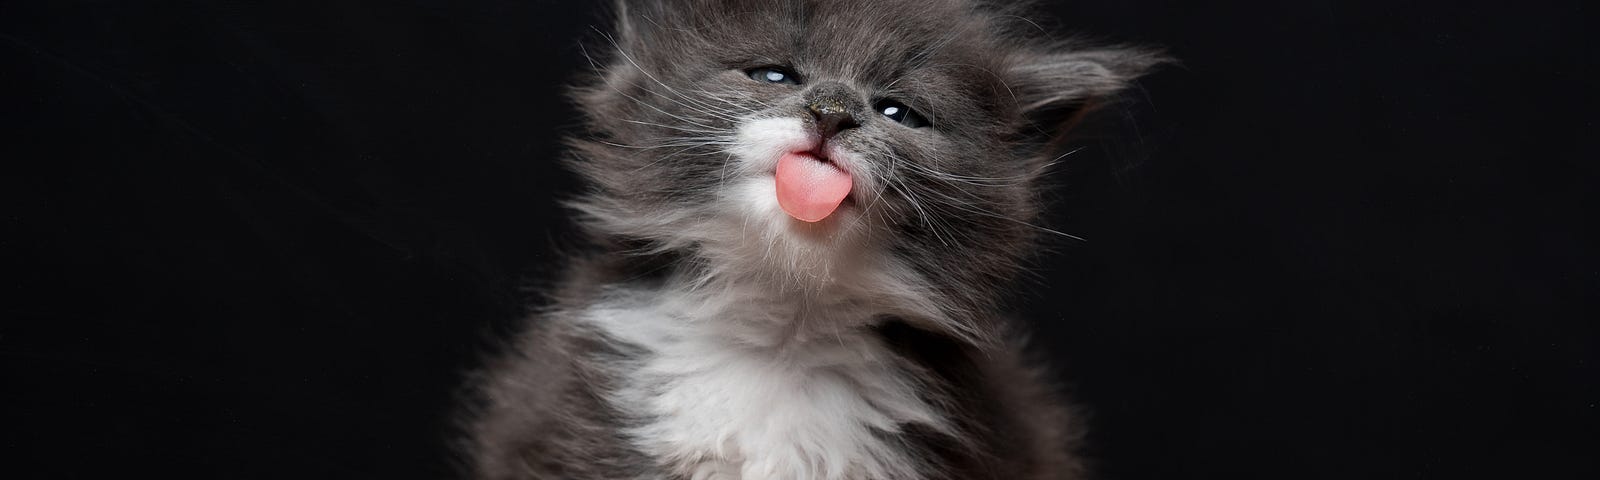 Kitten sticking out tongue.